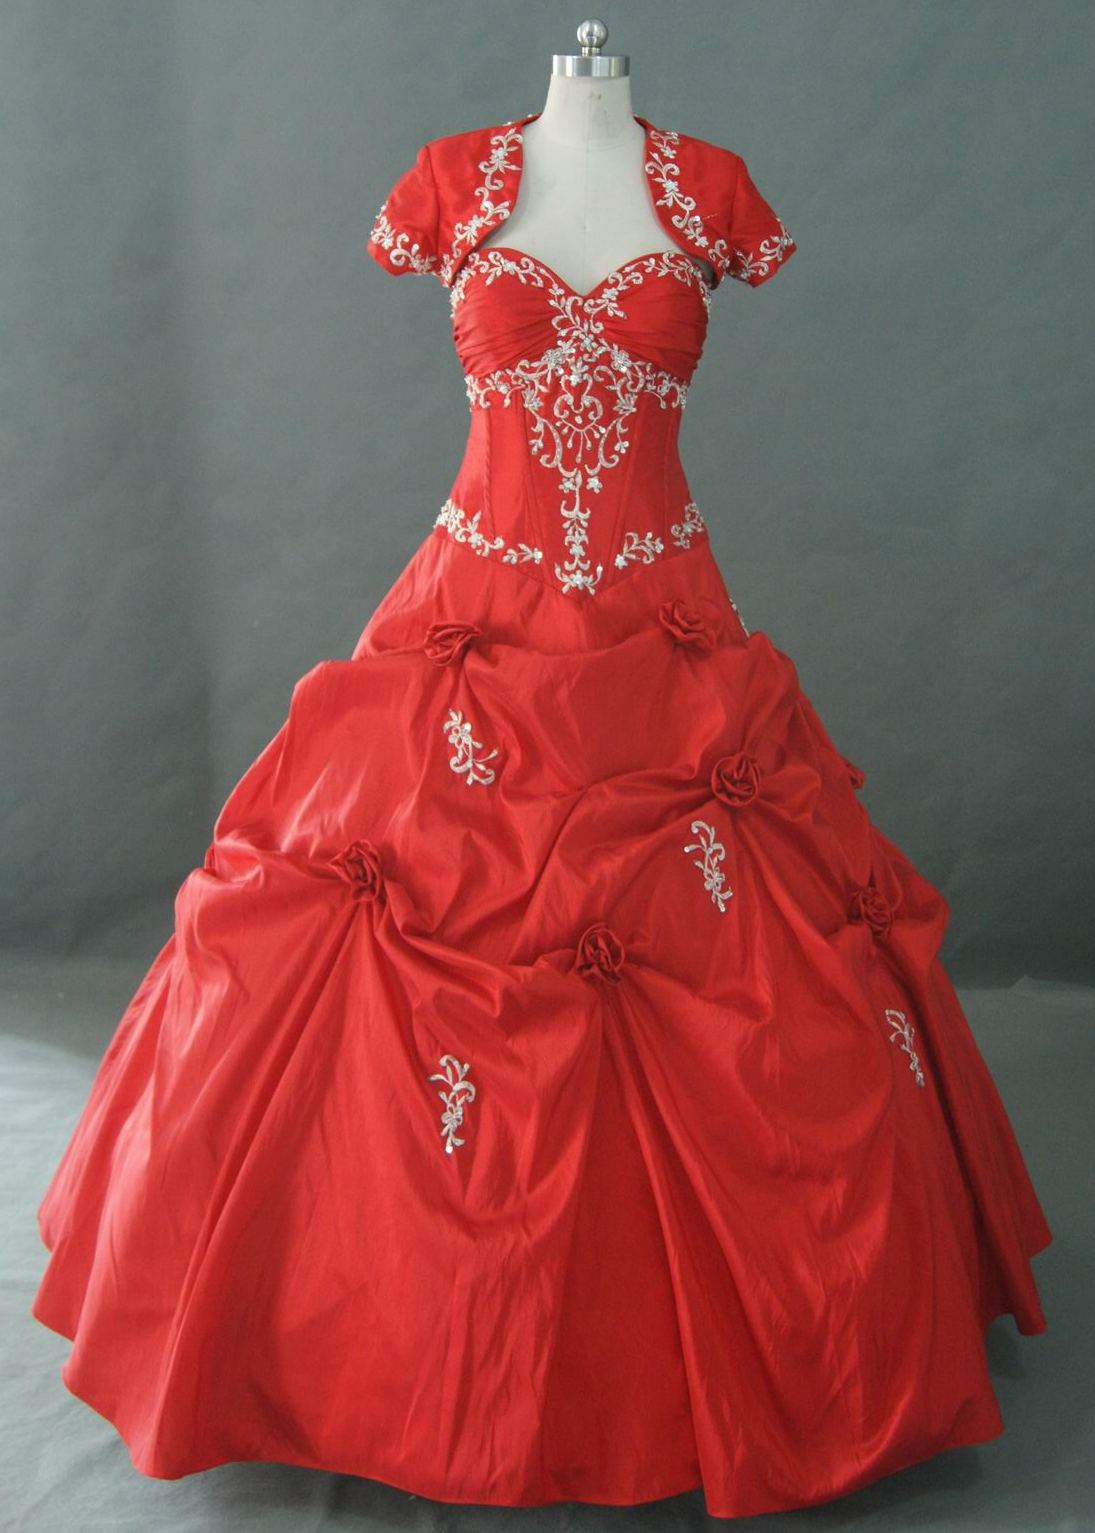 Red drop waist prom dress with flower detail.